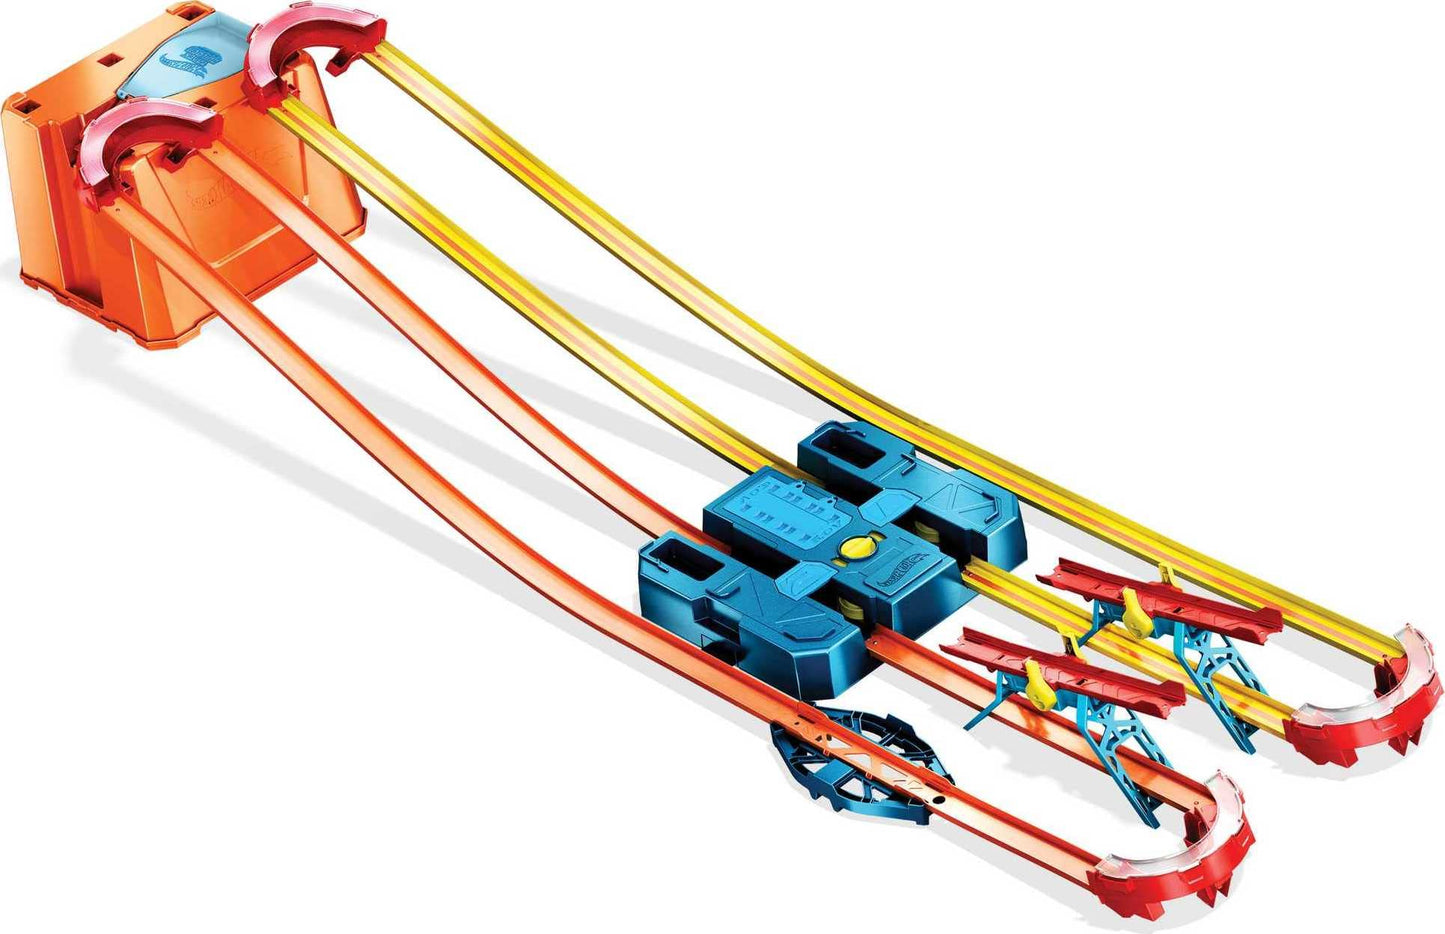 Hot Wheels Track Builder Unlimited Power Boost Box Compatible id Four Plus Builds 20 feet of Track Gift idea for Kids 6, 7, 8, 9, 10 and Older